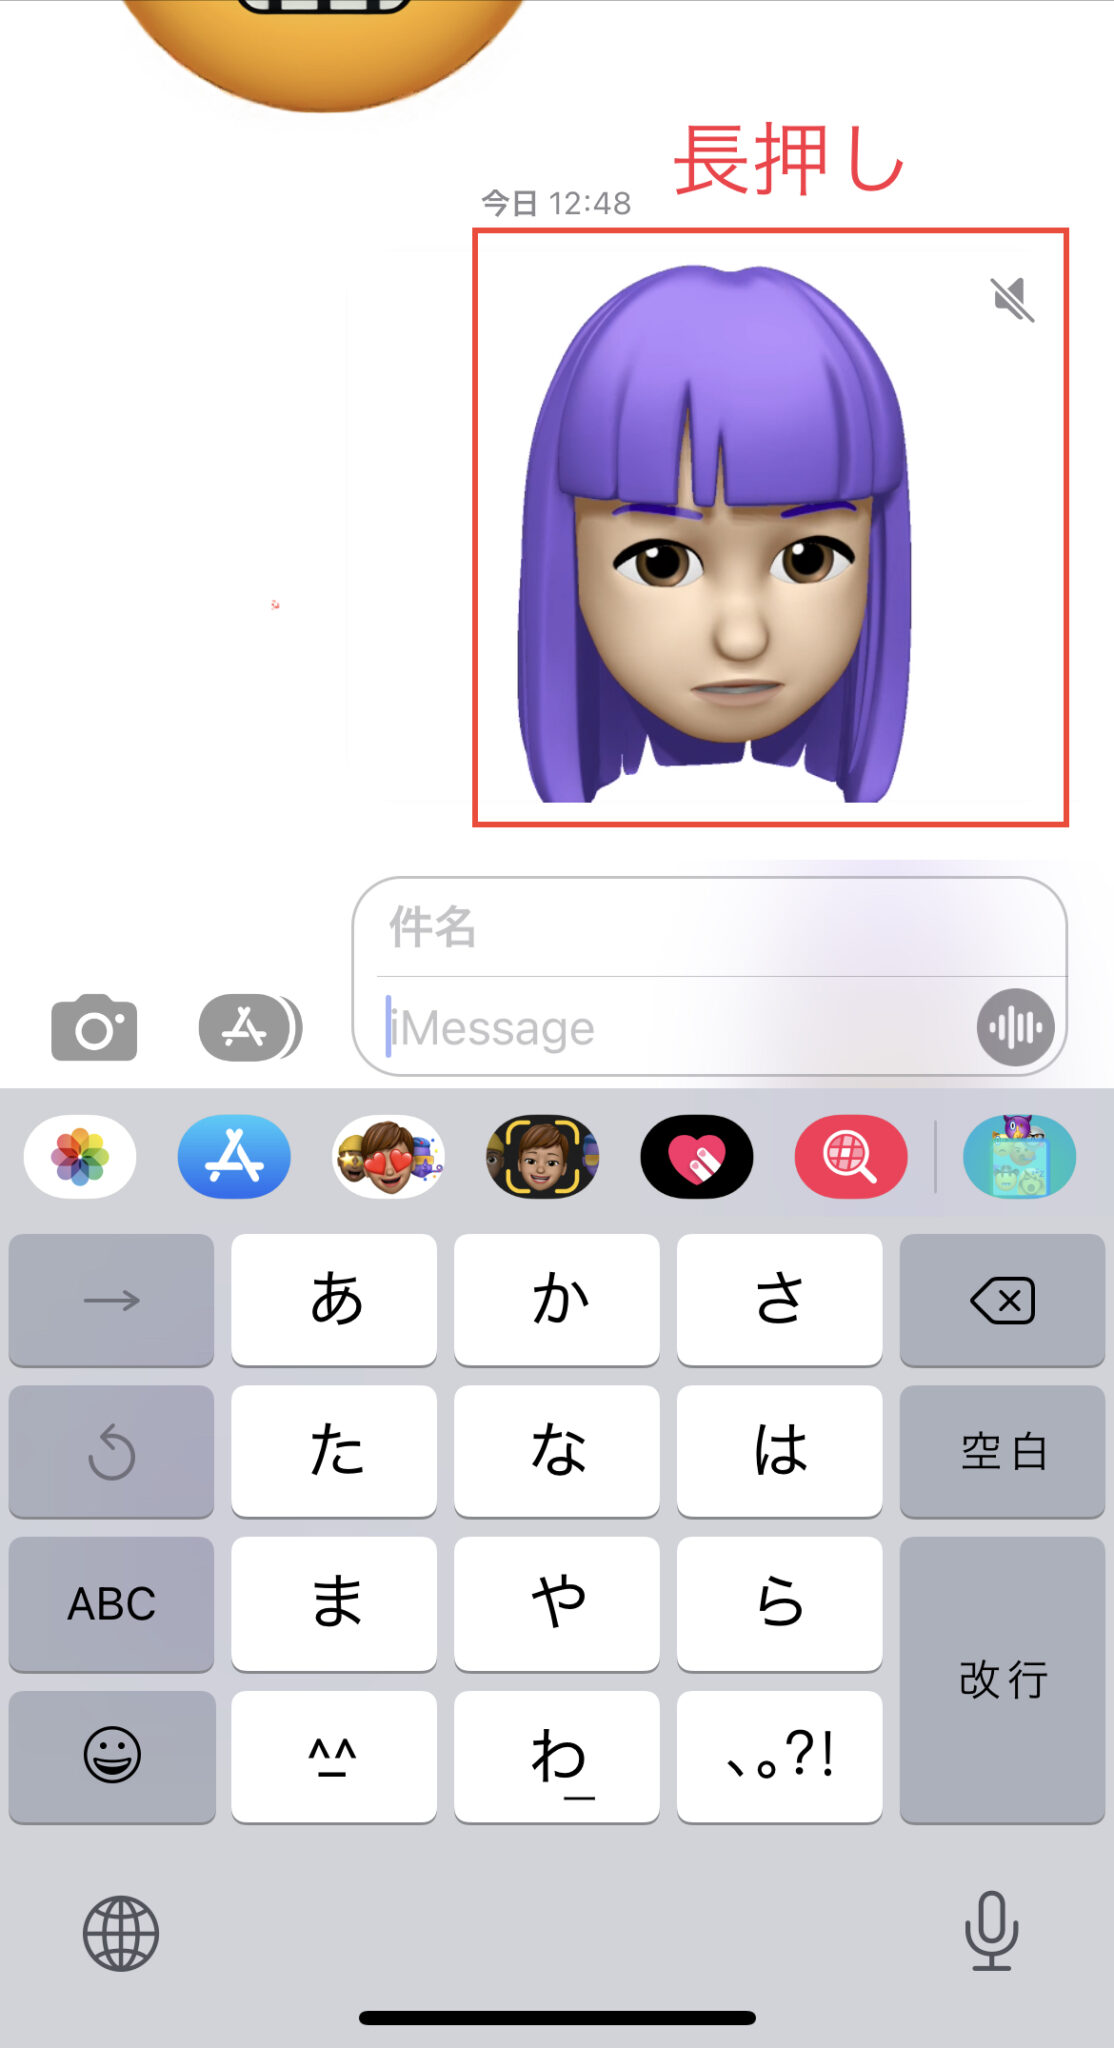 iphone の 絵文字 を 使い たい android